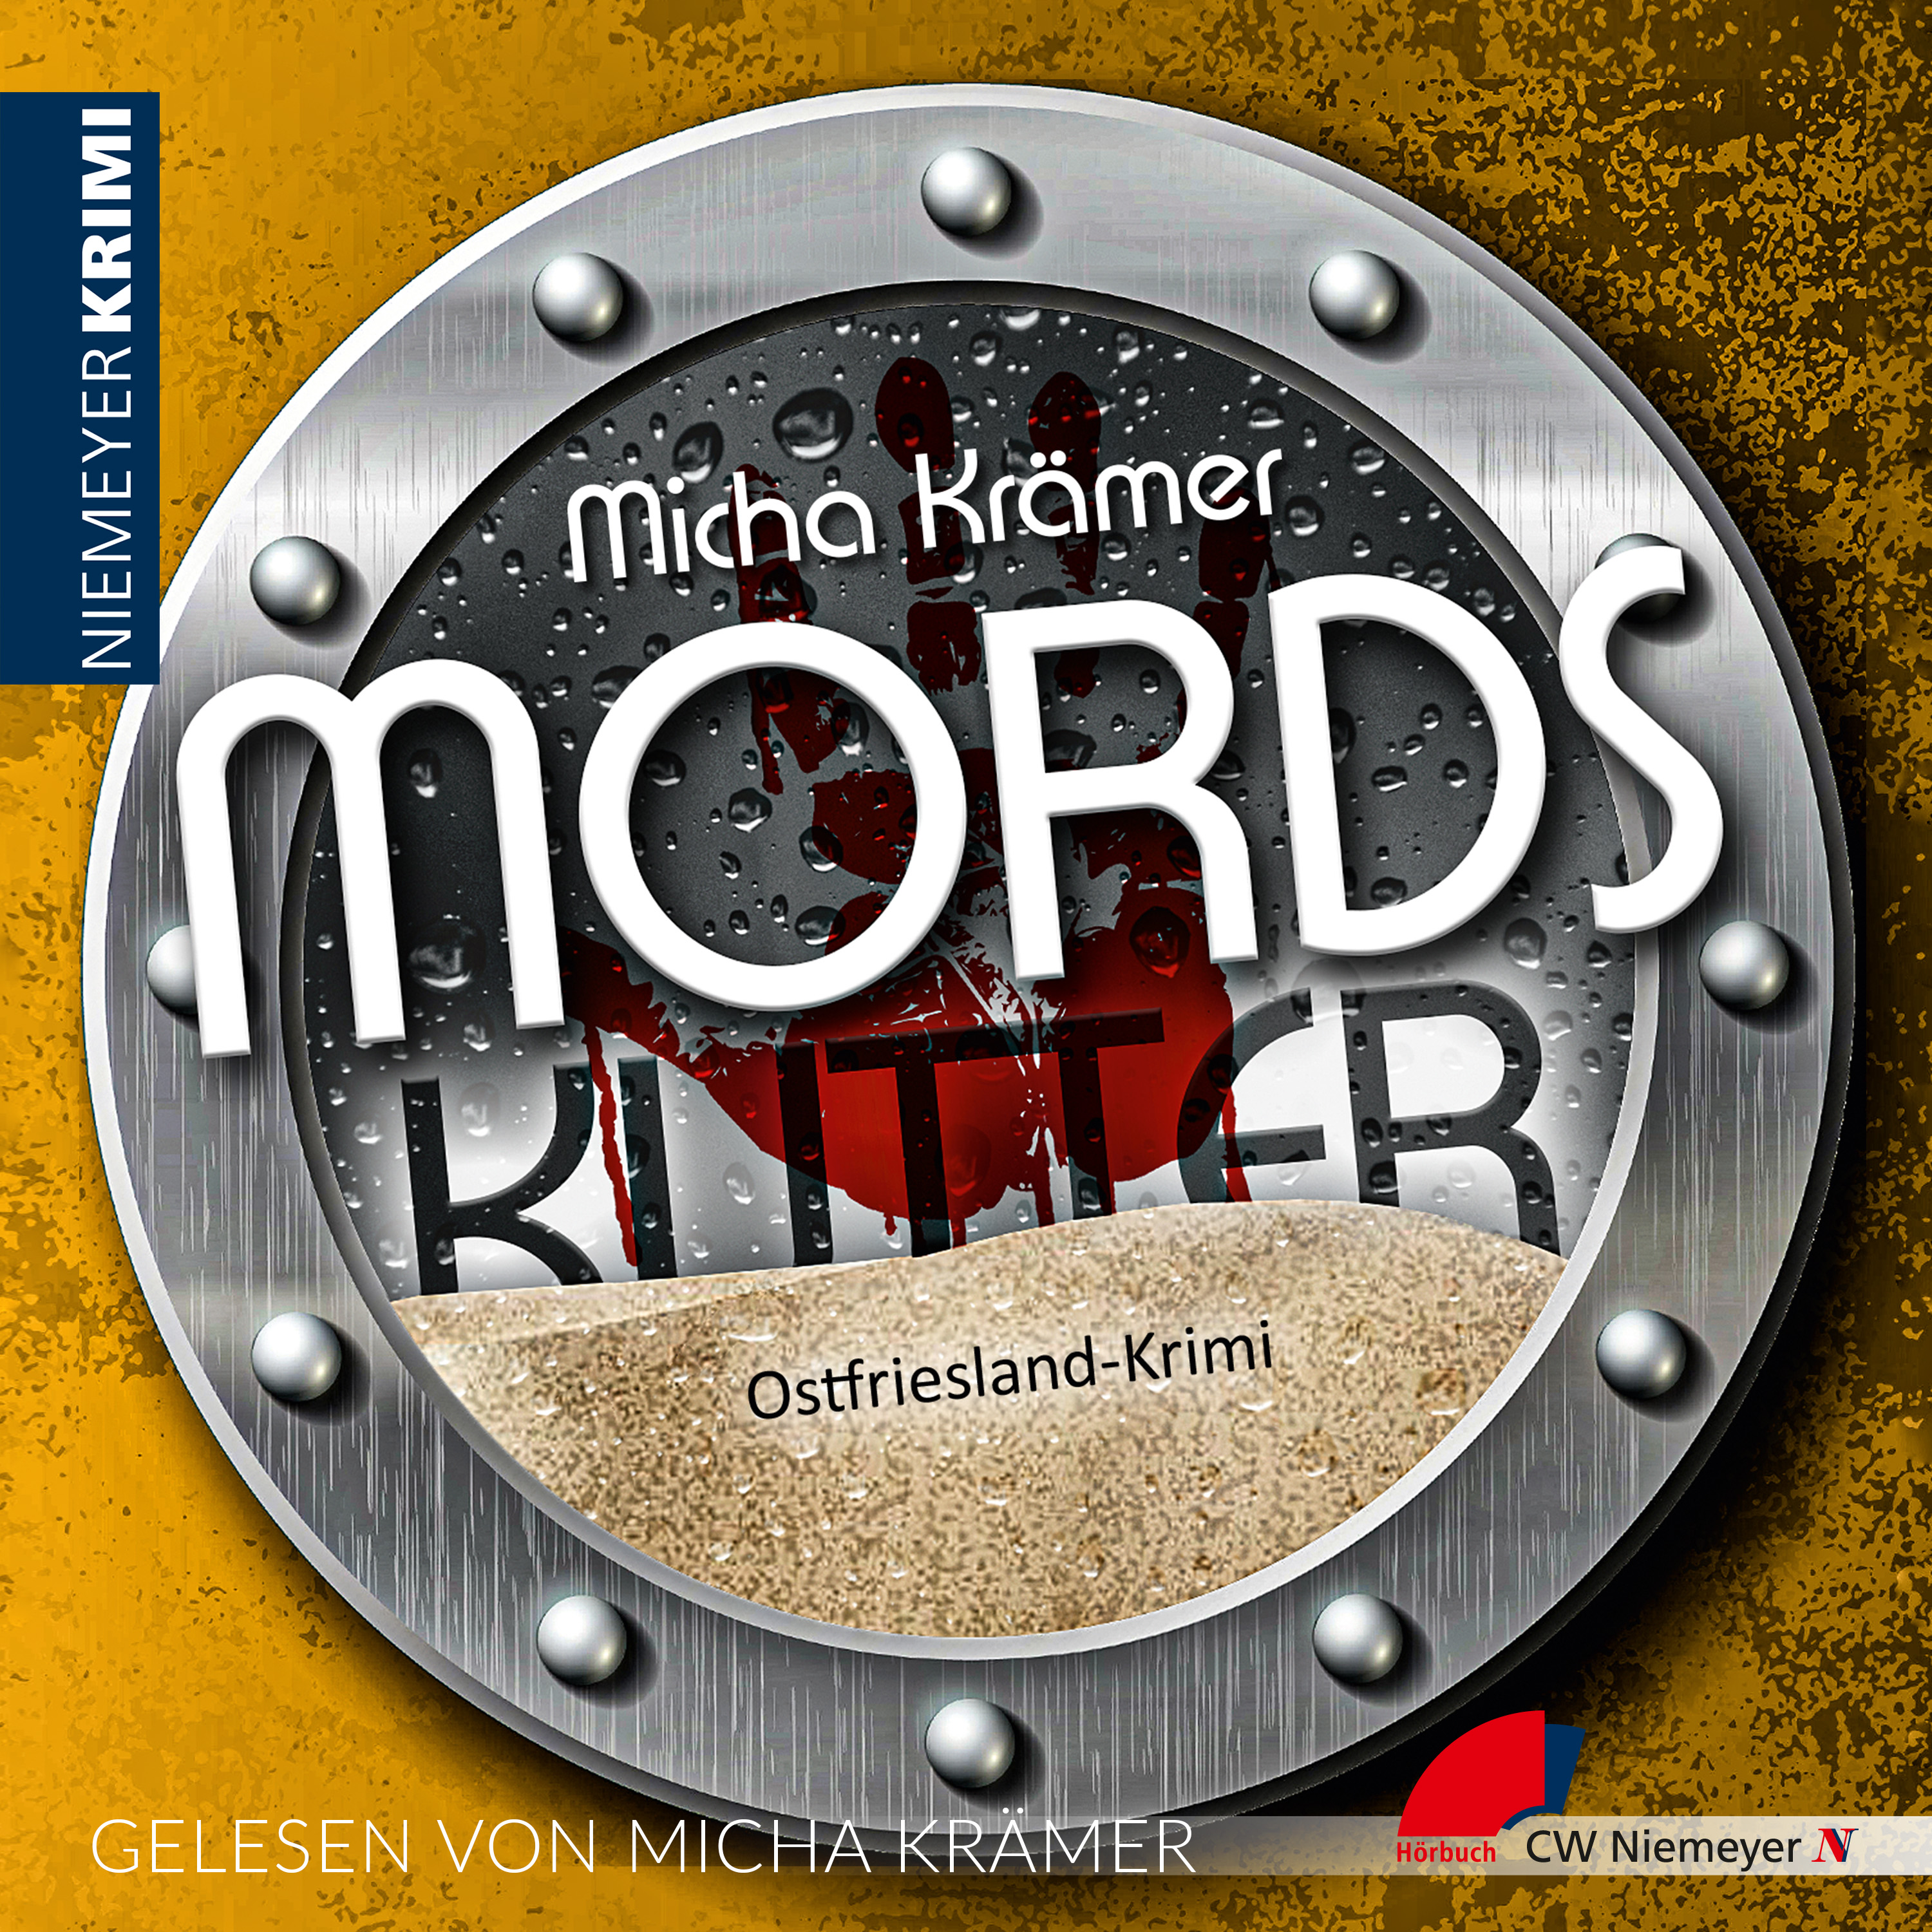 Hörbuch "Mordskutter" Mp3 CD